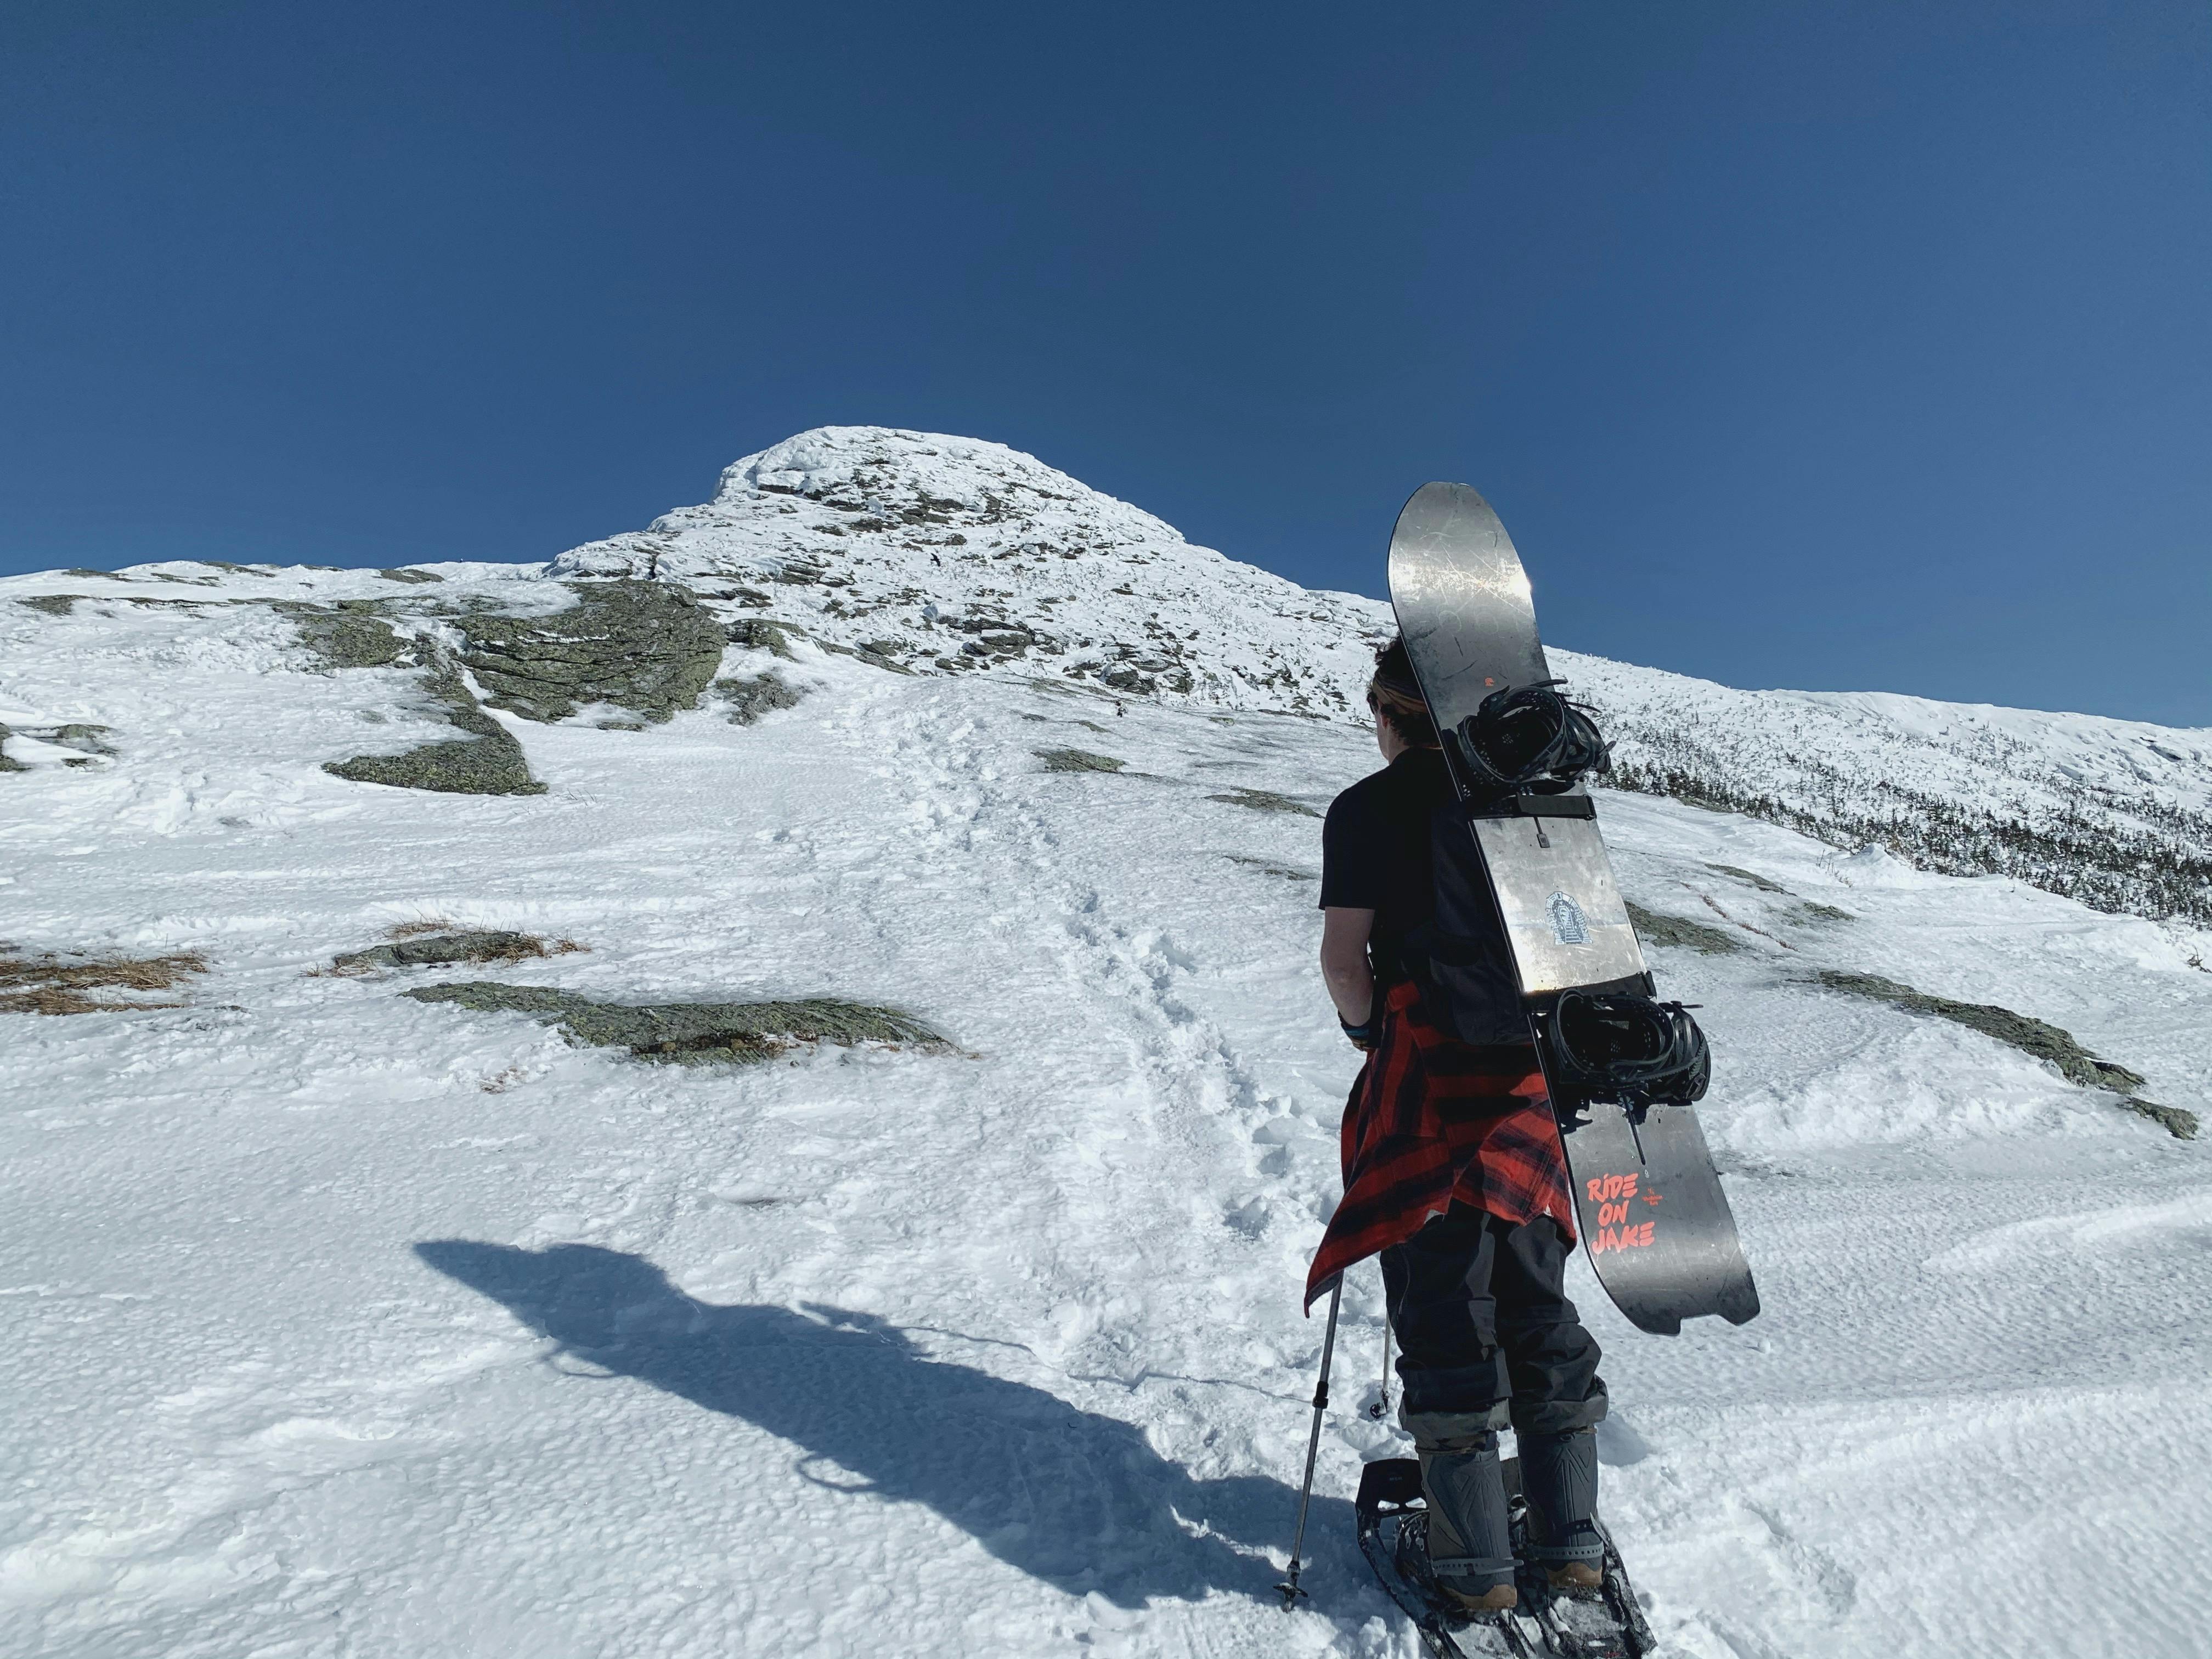 A person wears their snowboard on their back as they scale a hill in snowshoes